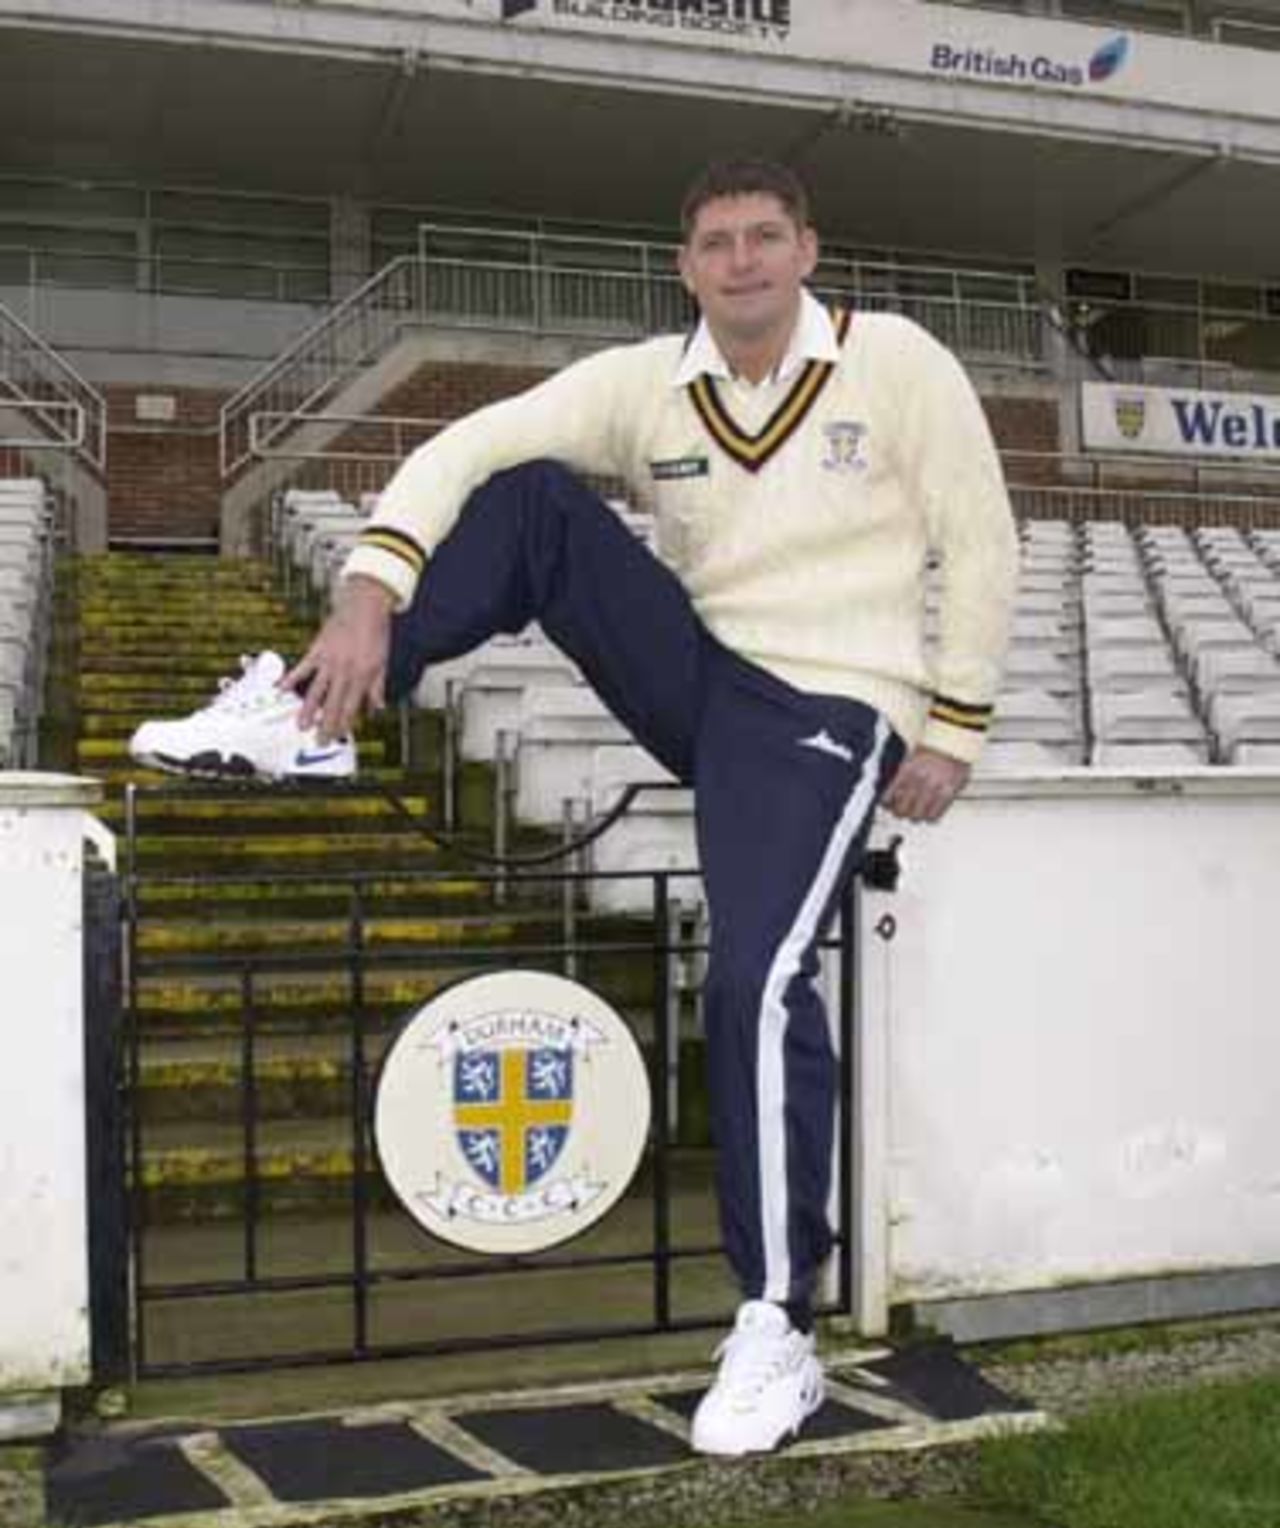 On his appointment as Durham coach